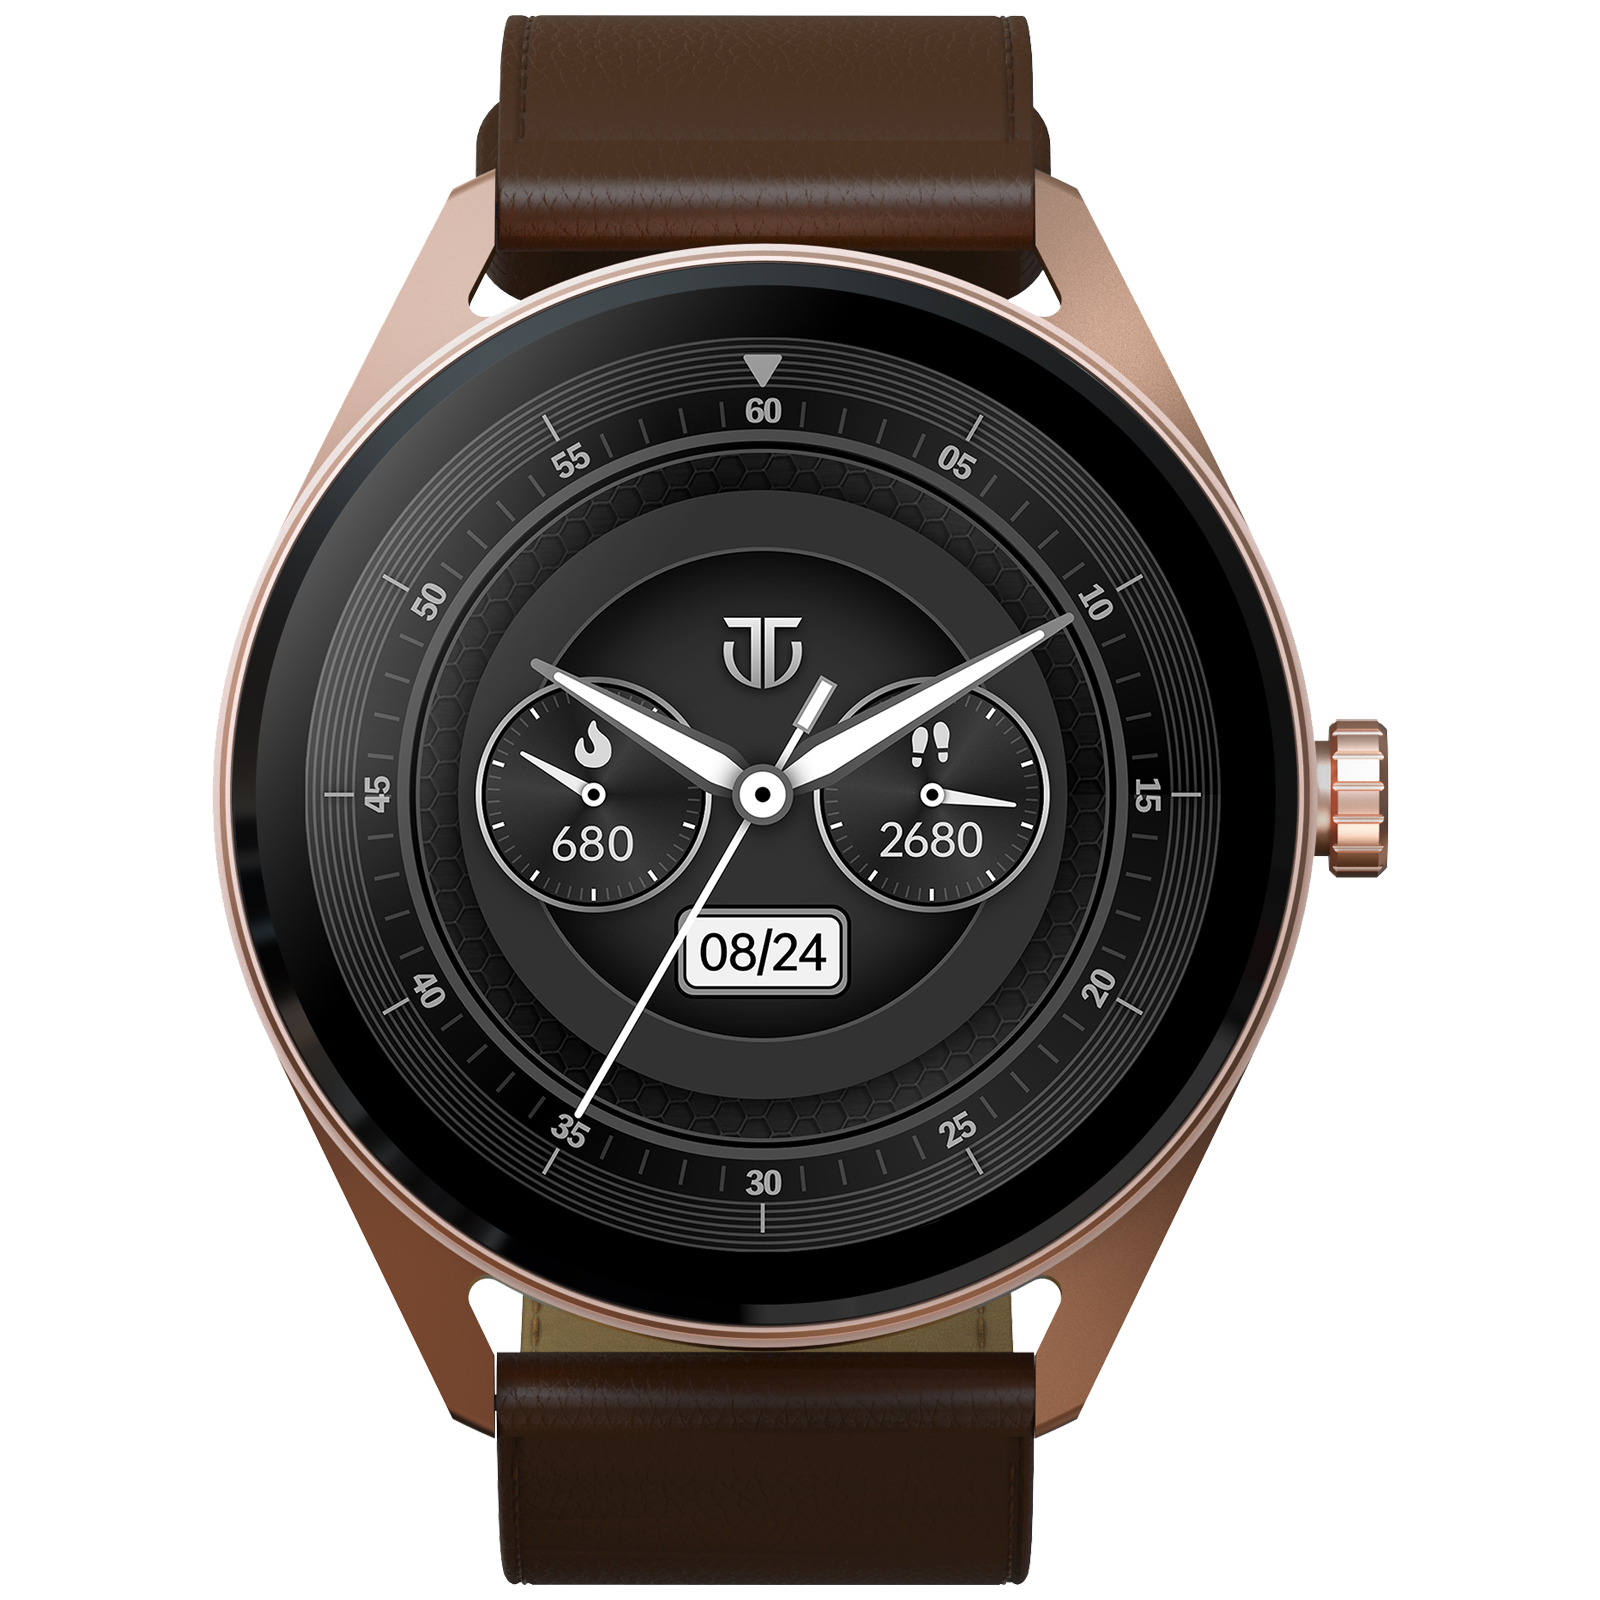 TITAN Crest Smartwatch with Bluetooth Calling (36.3mm AMOLED Display, IP68 Water Resistant, Brown Strap)